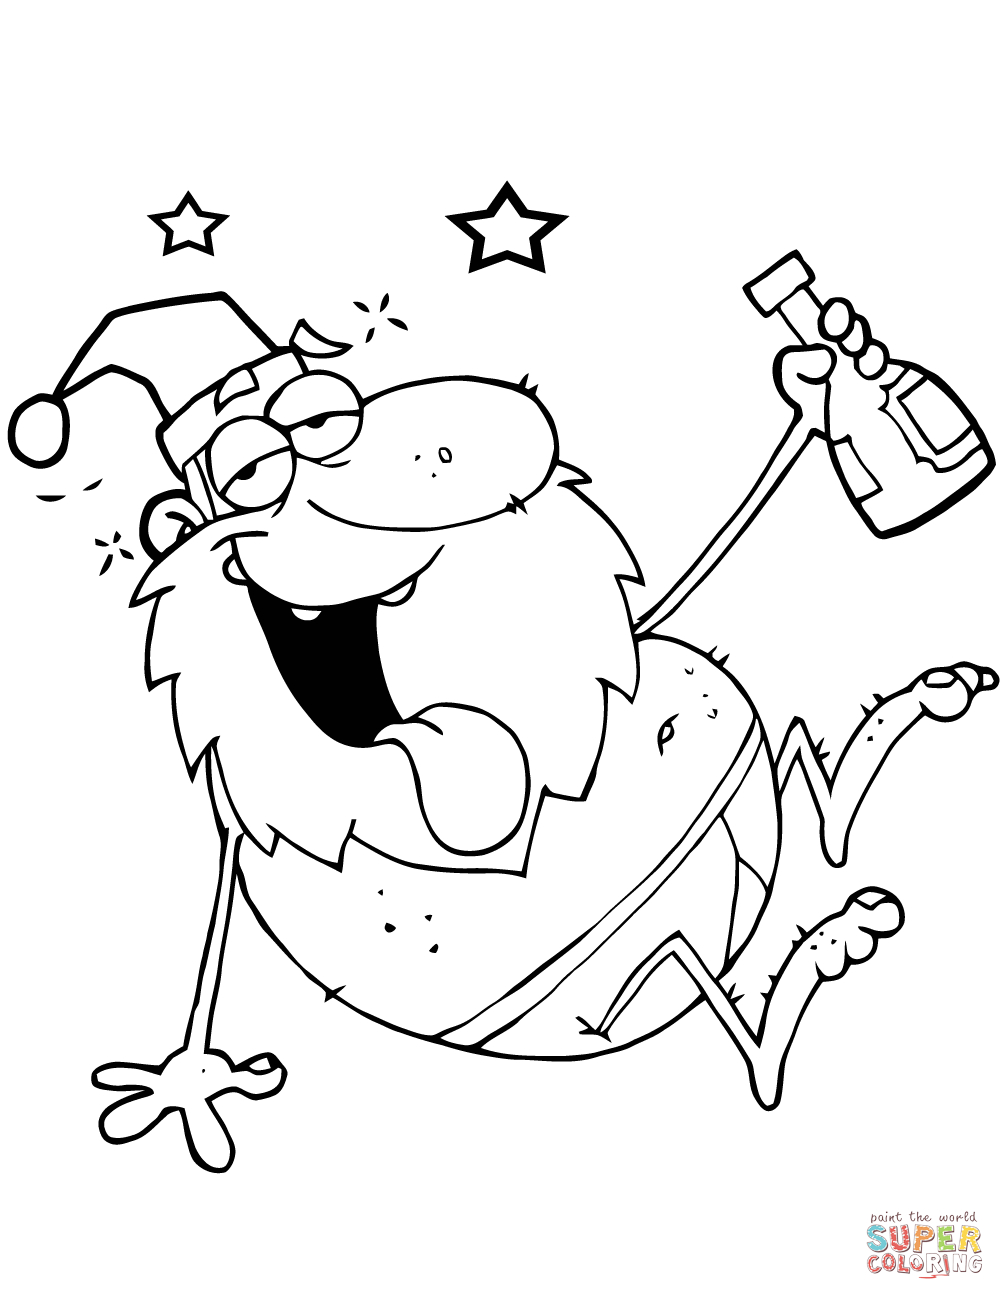 Coloring Pages ~ Santa Coloring Pages Printable Free Claus Page - Santa Coloring Pages Printable Free